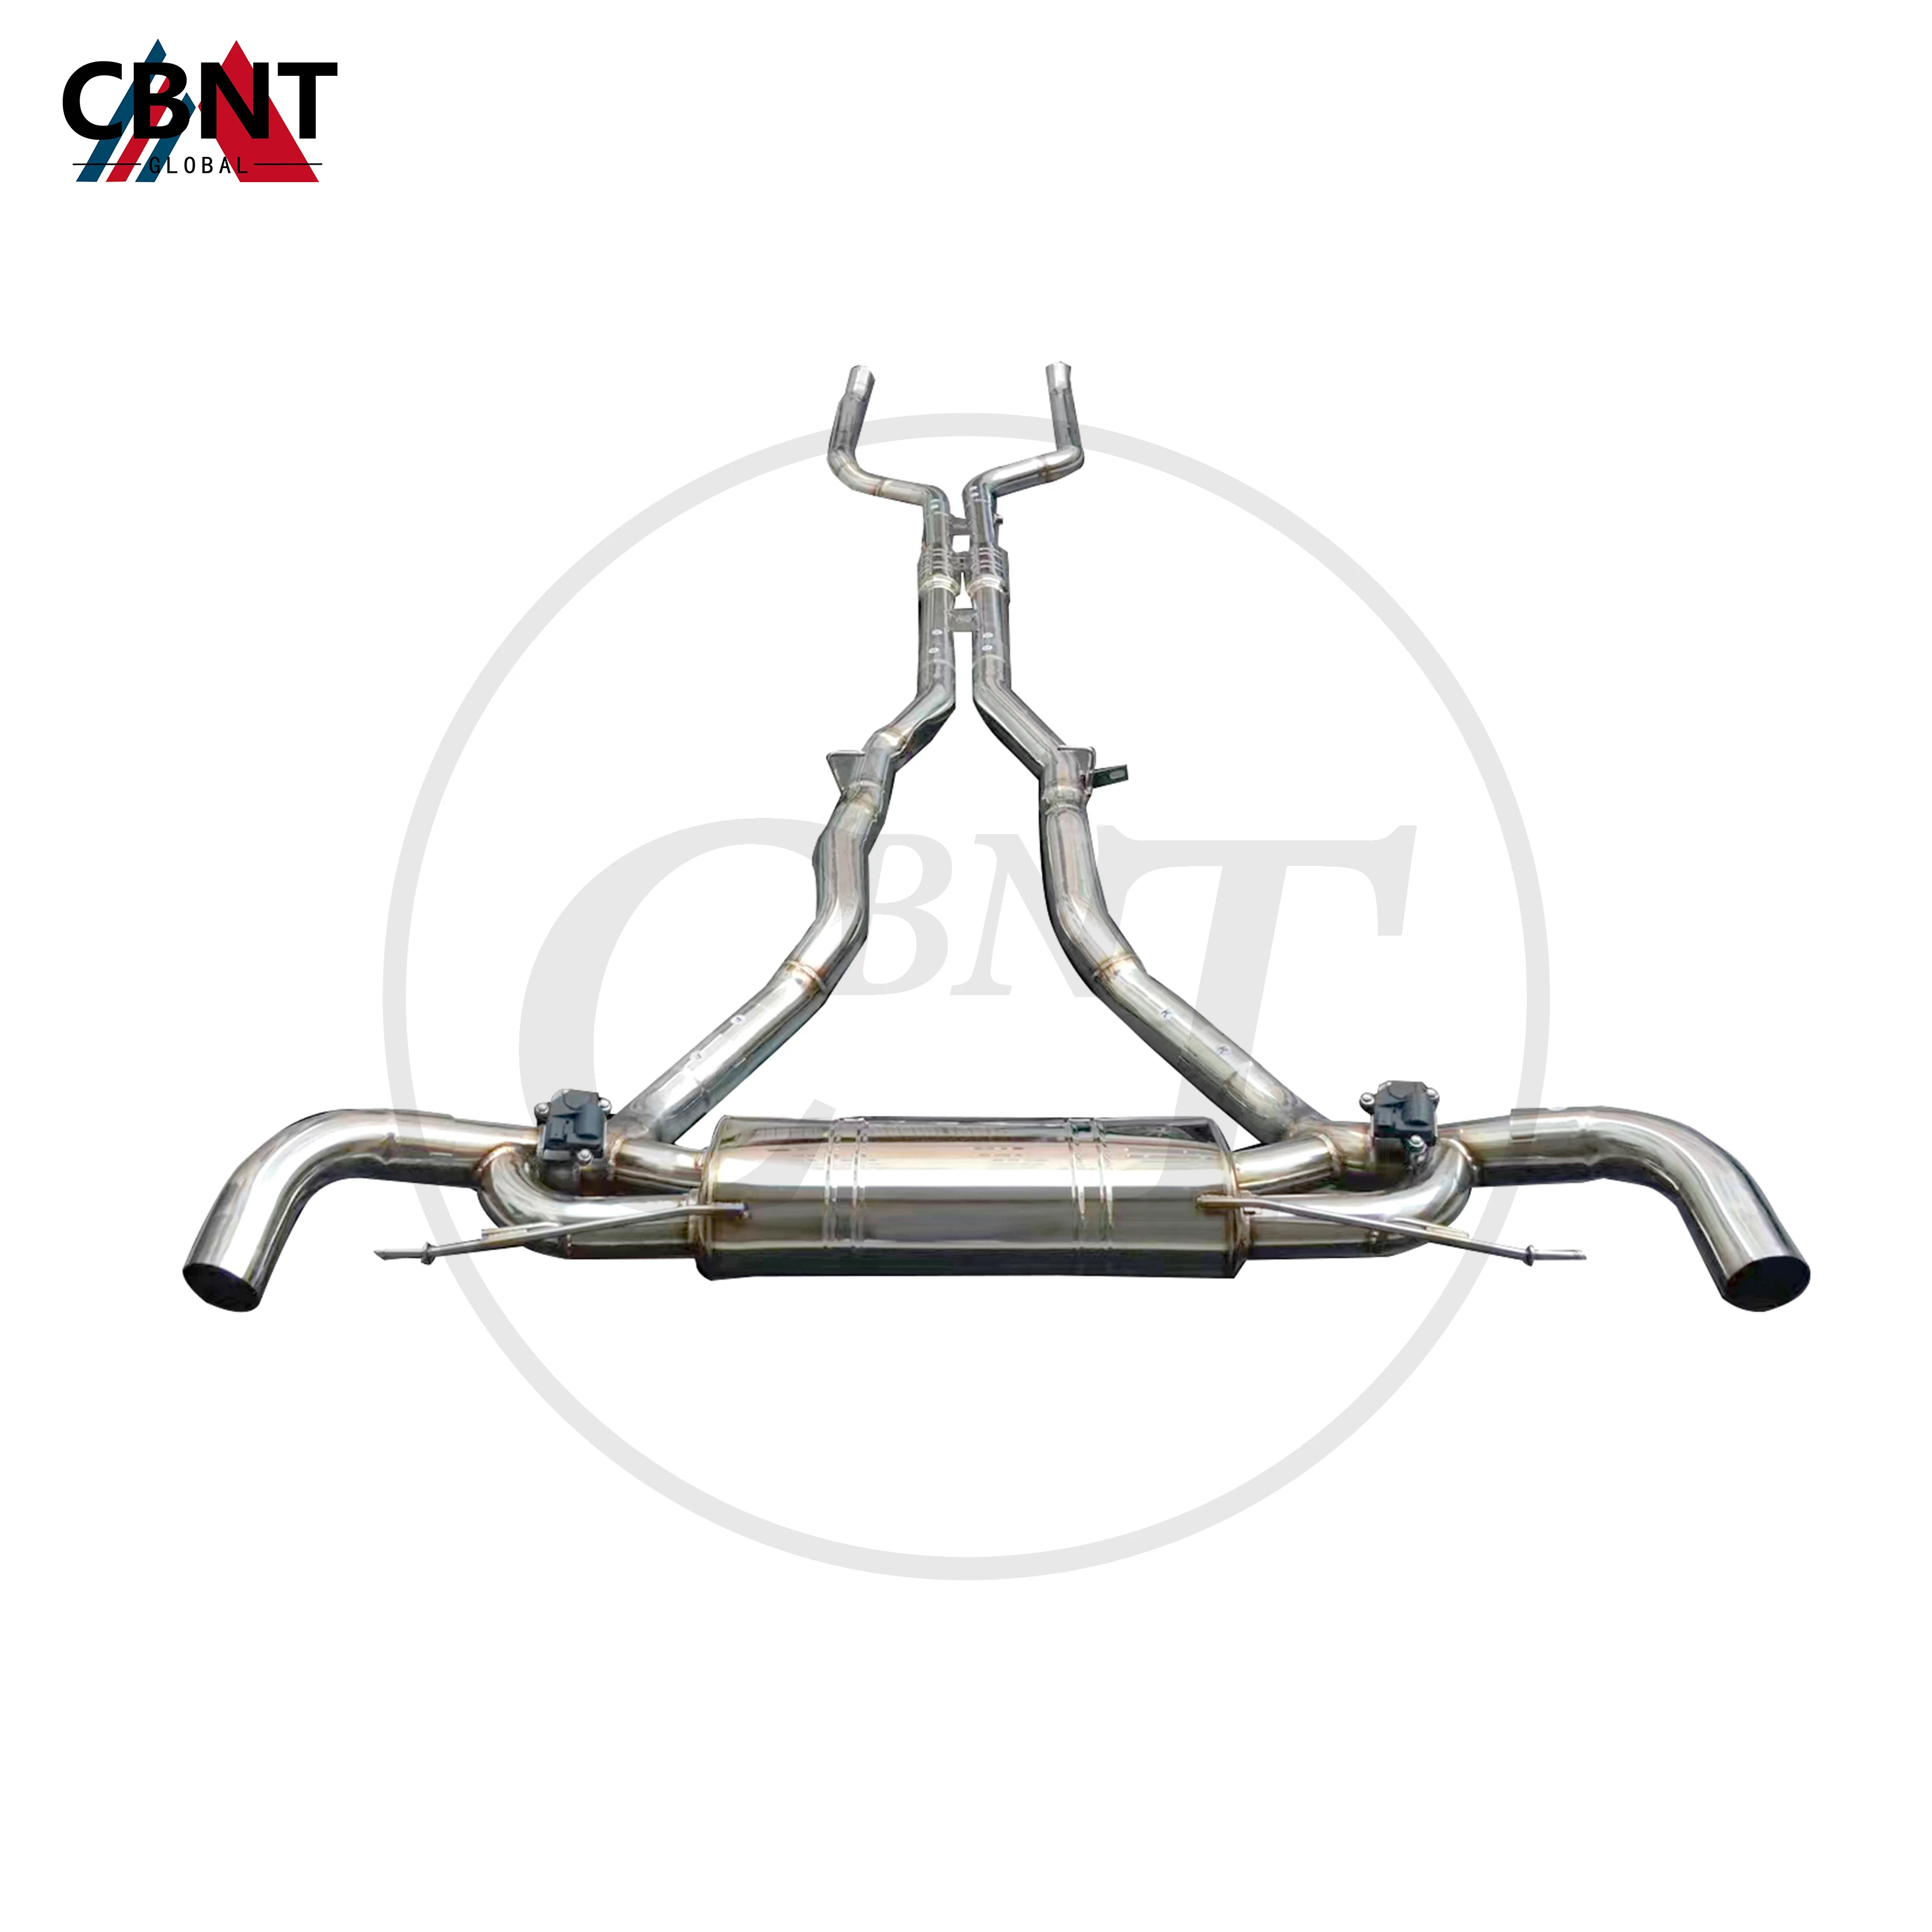 

CBNT for BMW X7 M50i Valved Exhaust-pipe Tuning Valvetronic Catback Pipe with Valve Muffler Performance SS304 Exhaust System